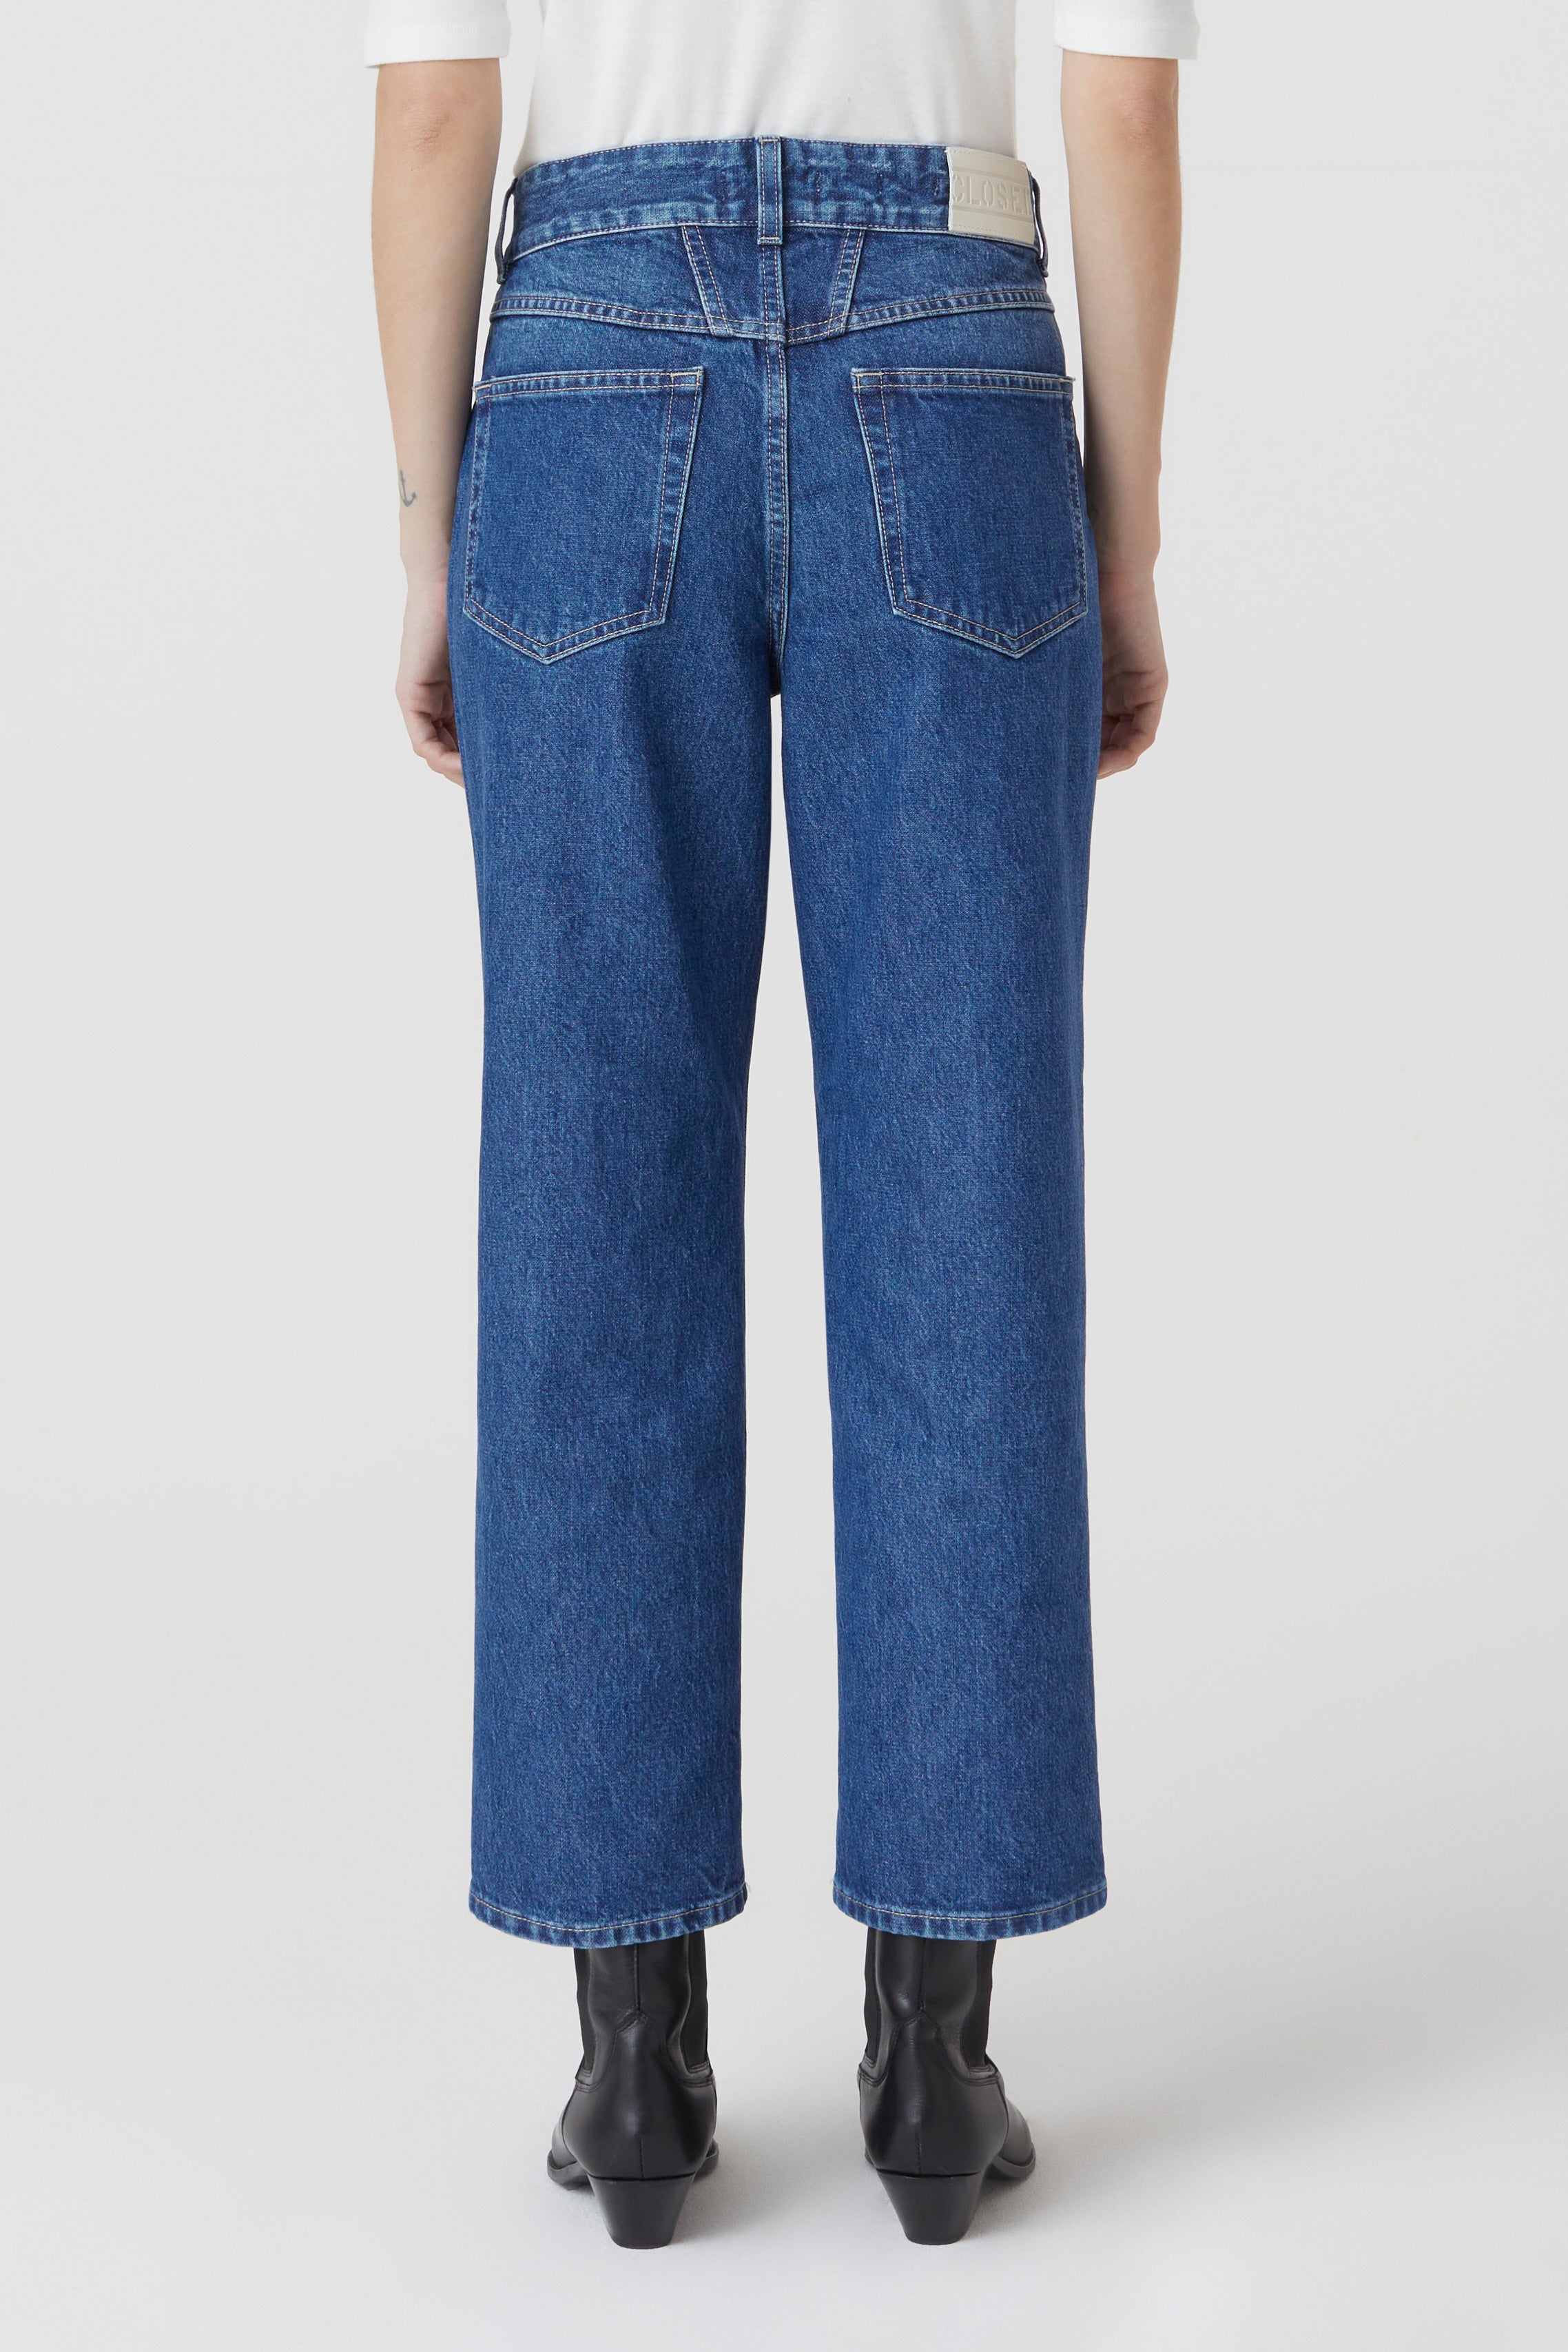 CLOSED-OUTLET-SALE-STYLE-NAME-MILO-JEANS-Jeans-ARCHIVE-COLLECTION-2.jpg